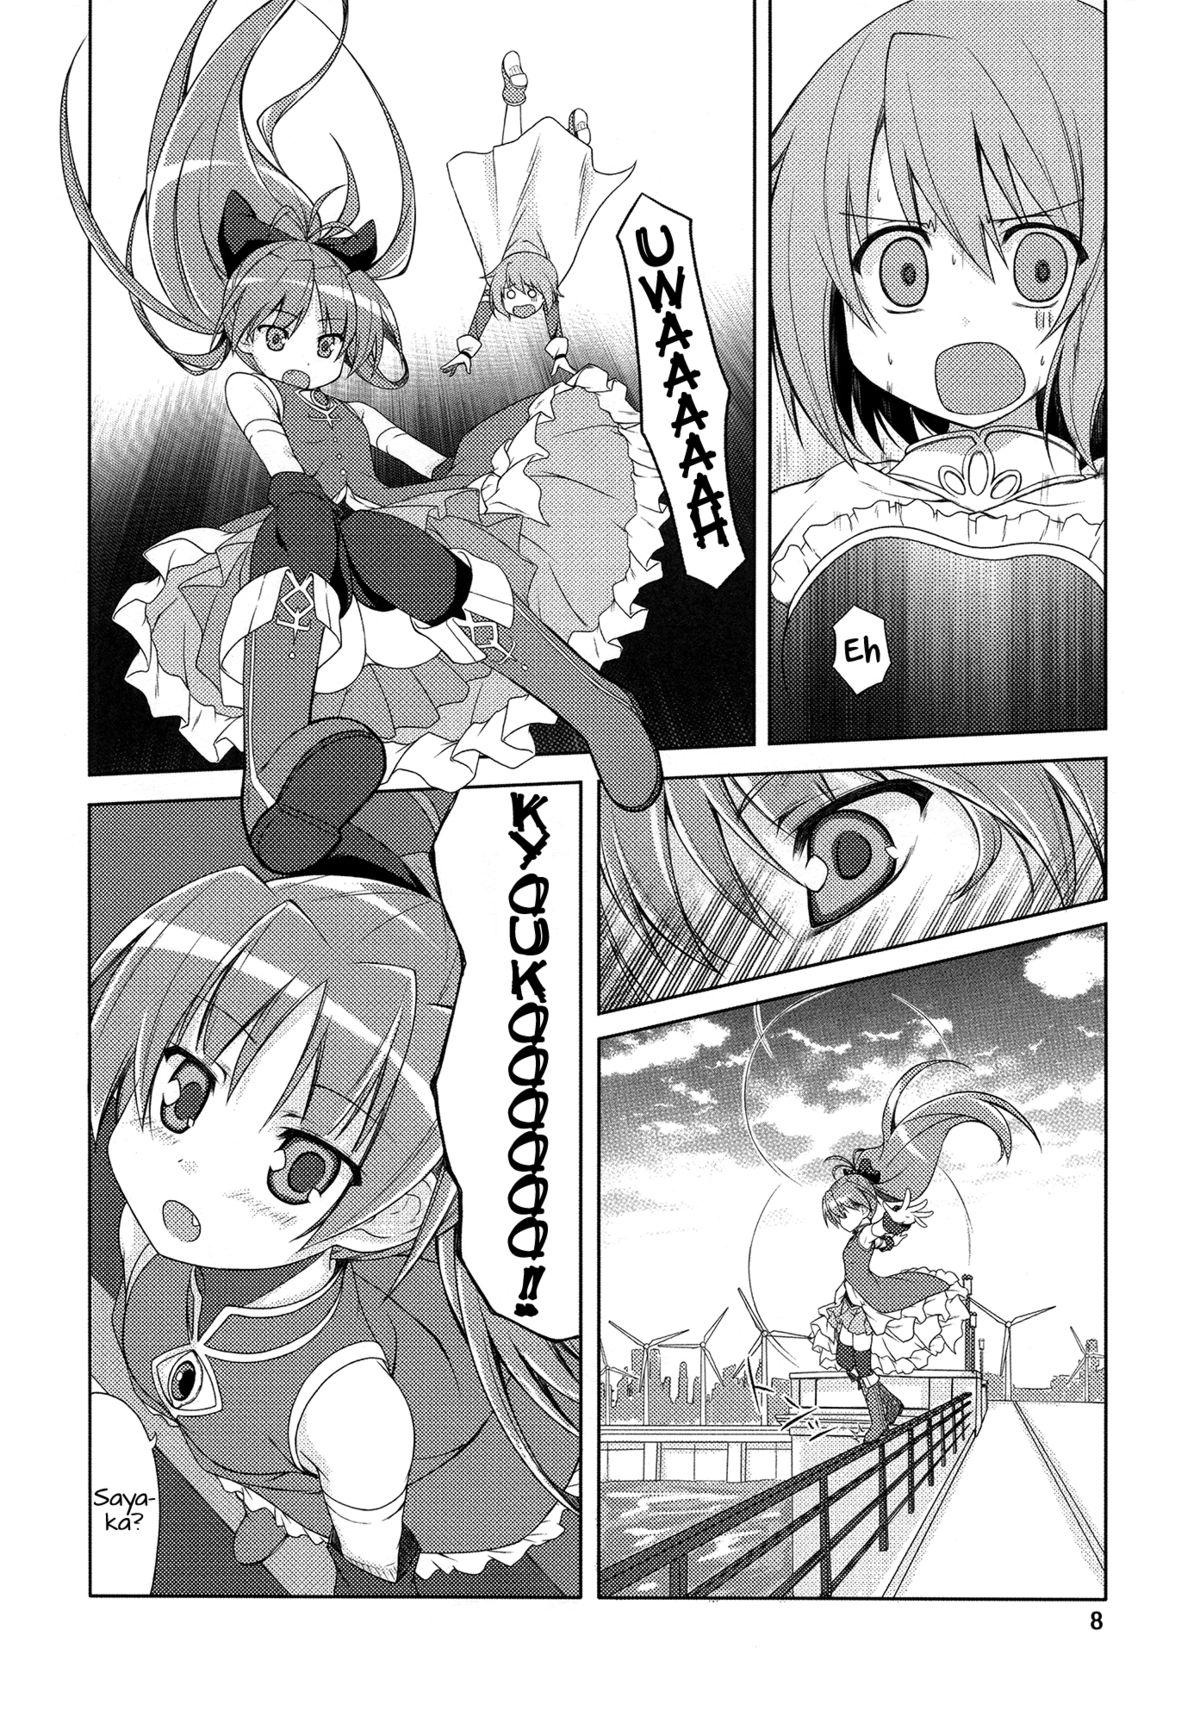 Hot Girl Pussy Be with you - Puella magi madoka magica Hard Core Porn - Page 7